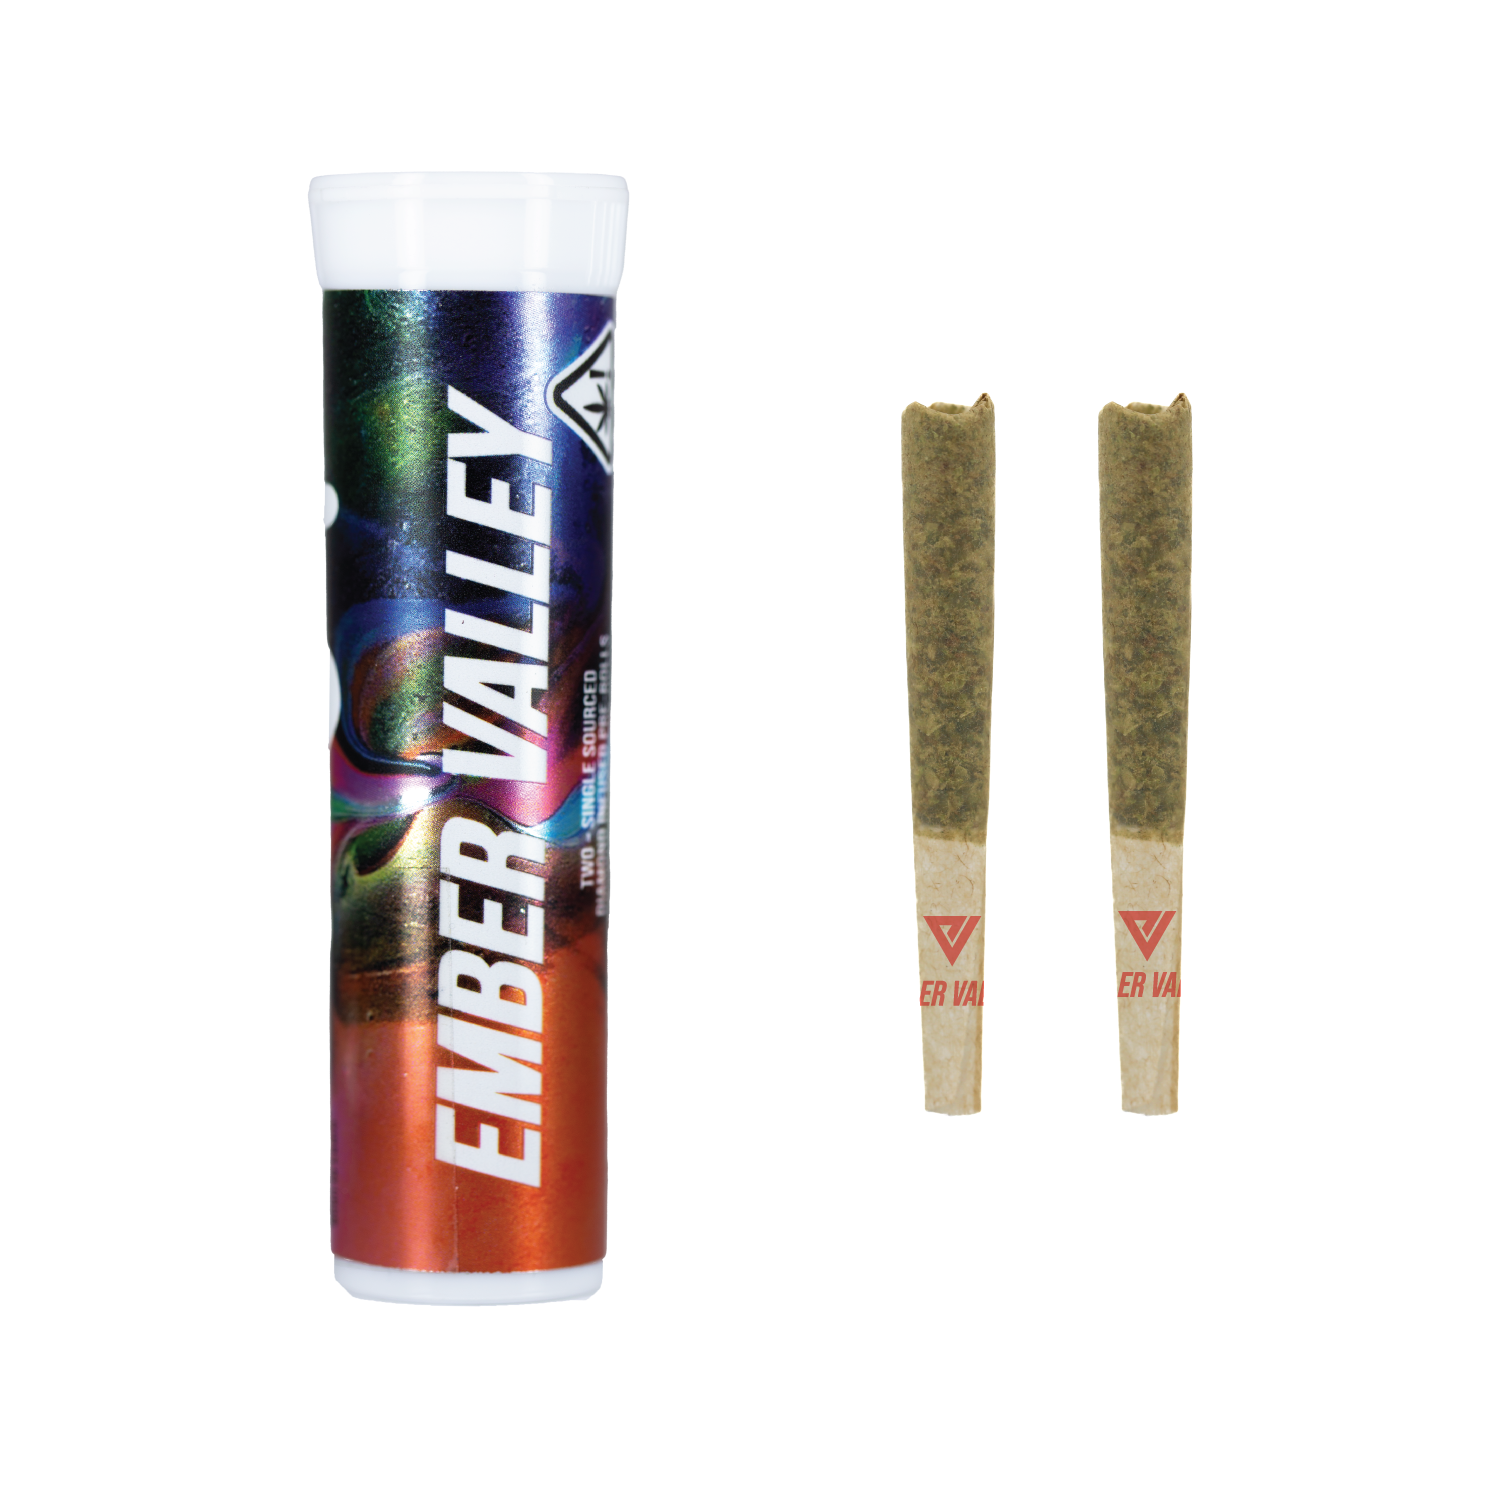 Grapefruit Zlushies Infused Pre-roll 2 Pack [.5g]